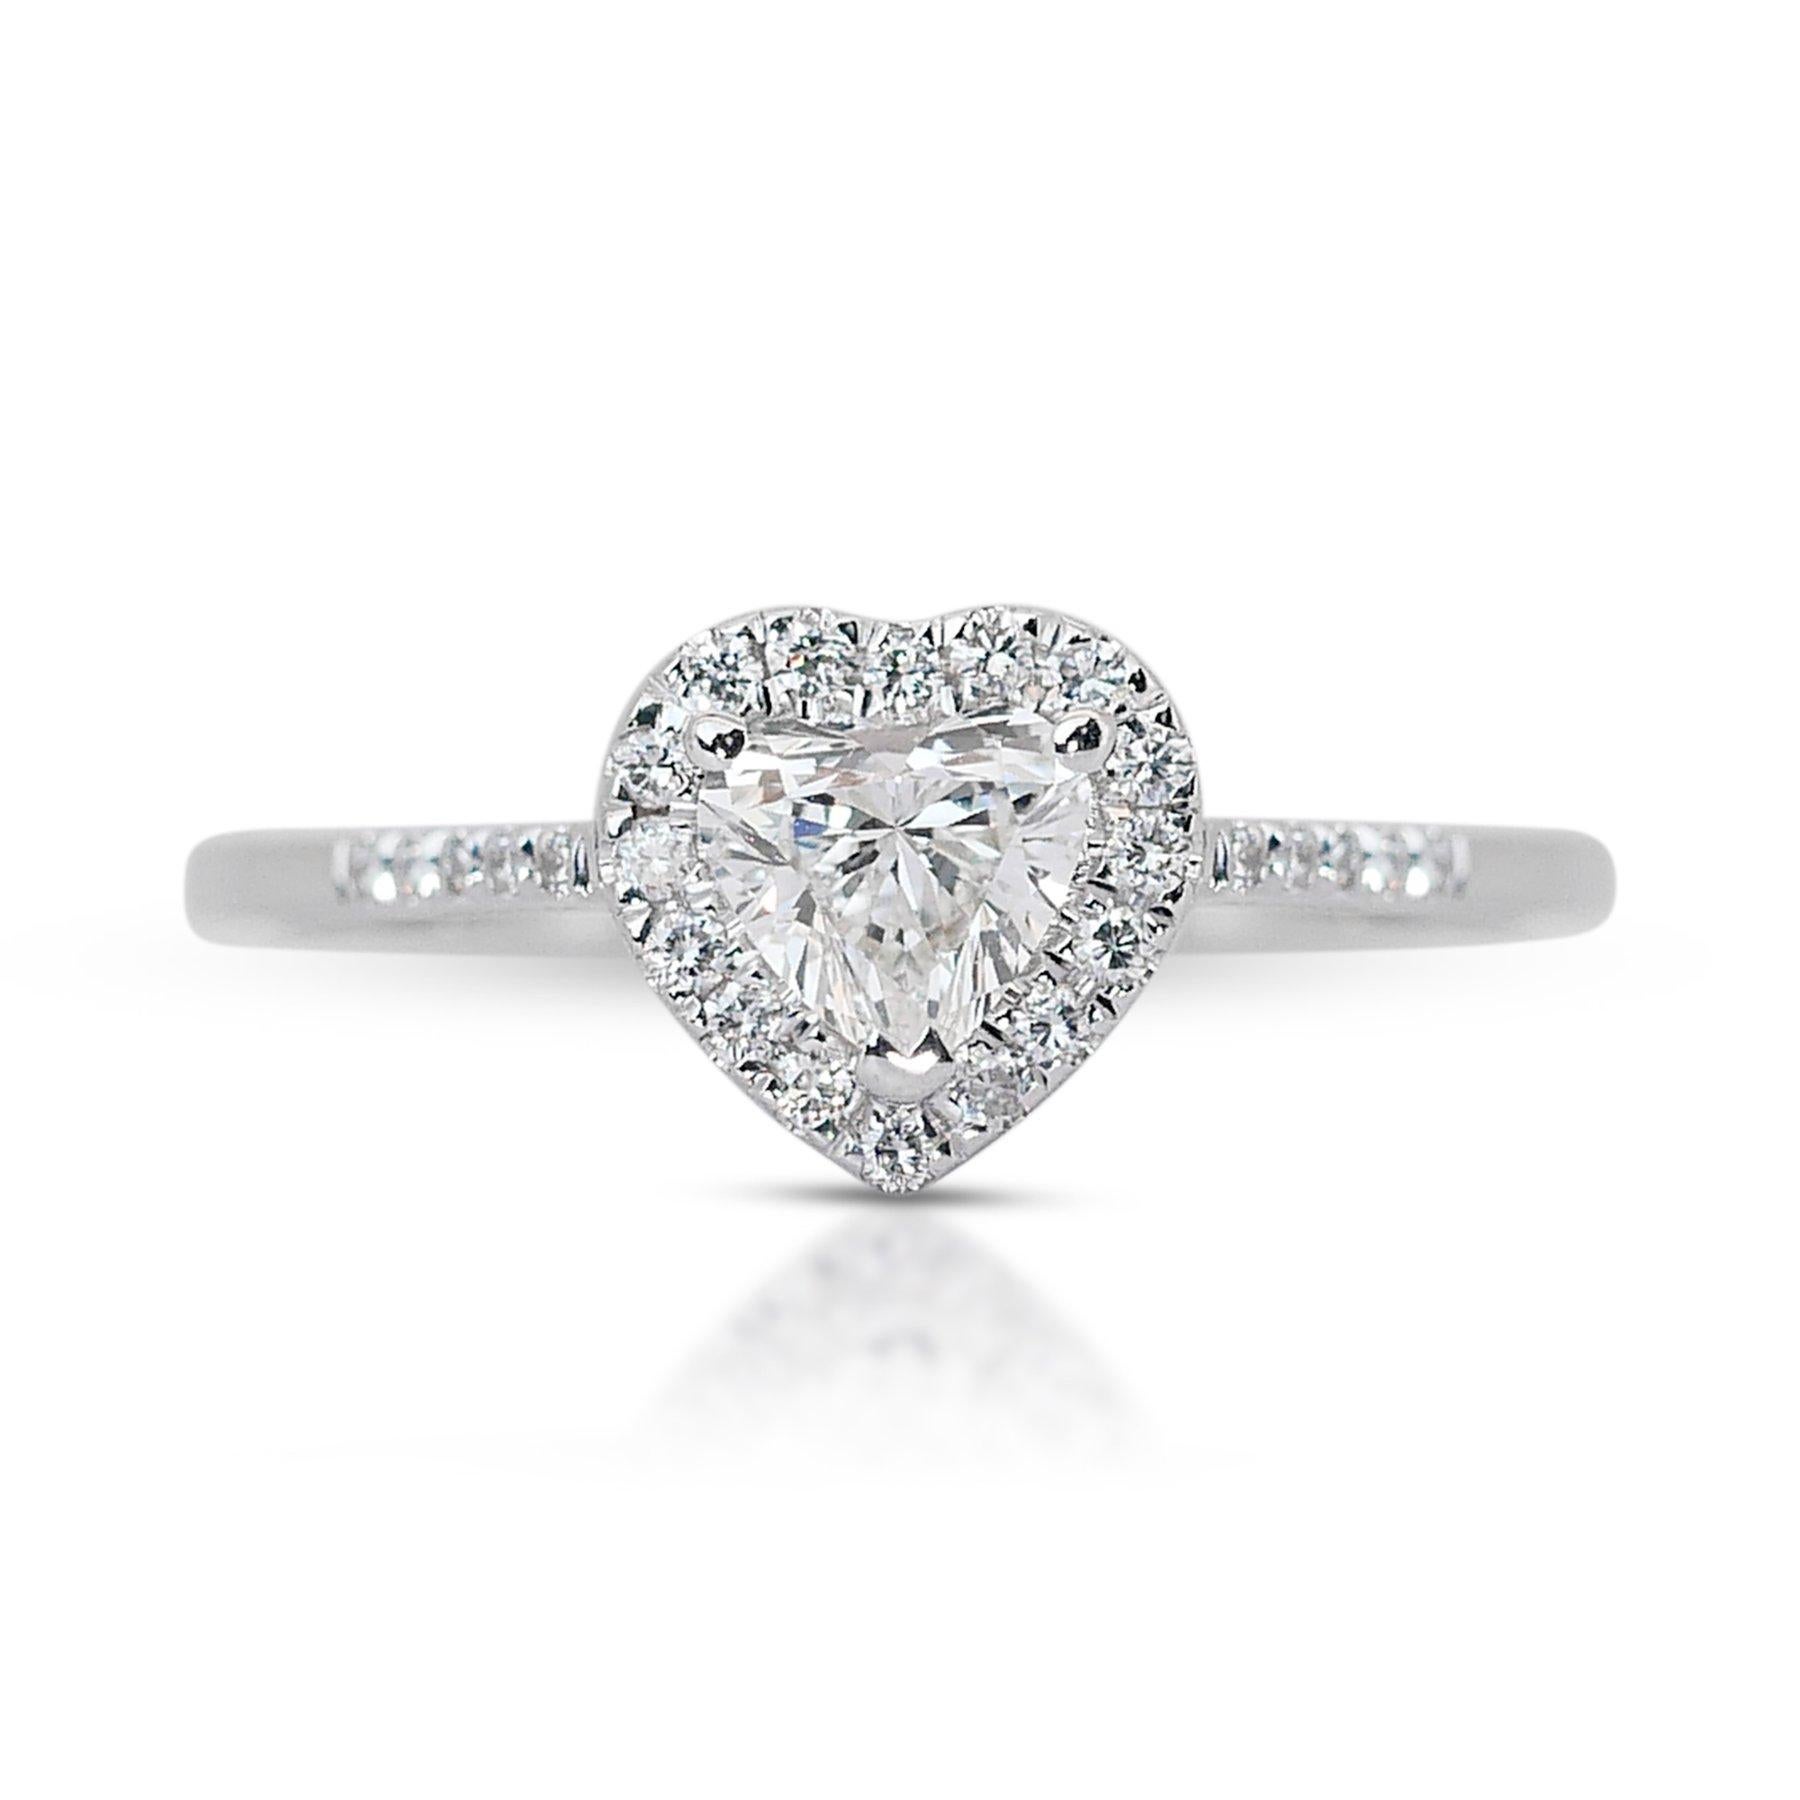 Charming 0.75ct Diamonds Halo Ring in 18k White Gold - IGI Certified For Sale 3